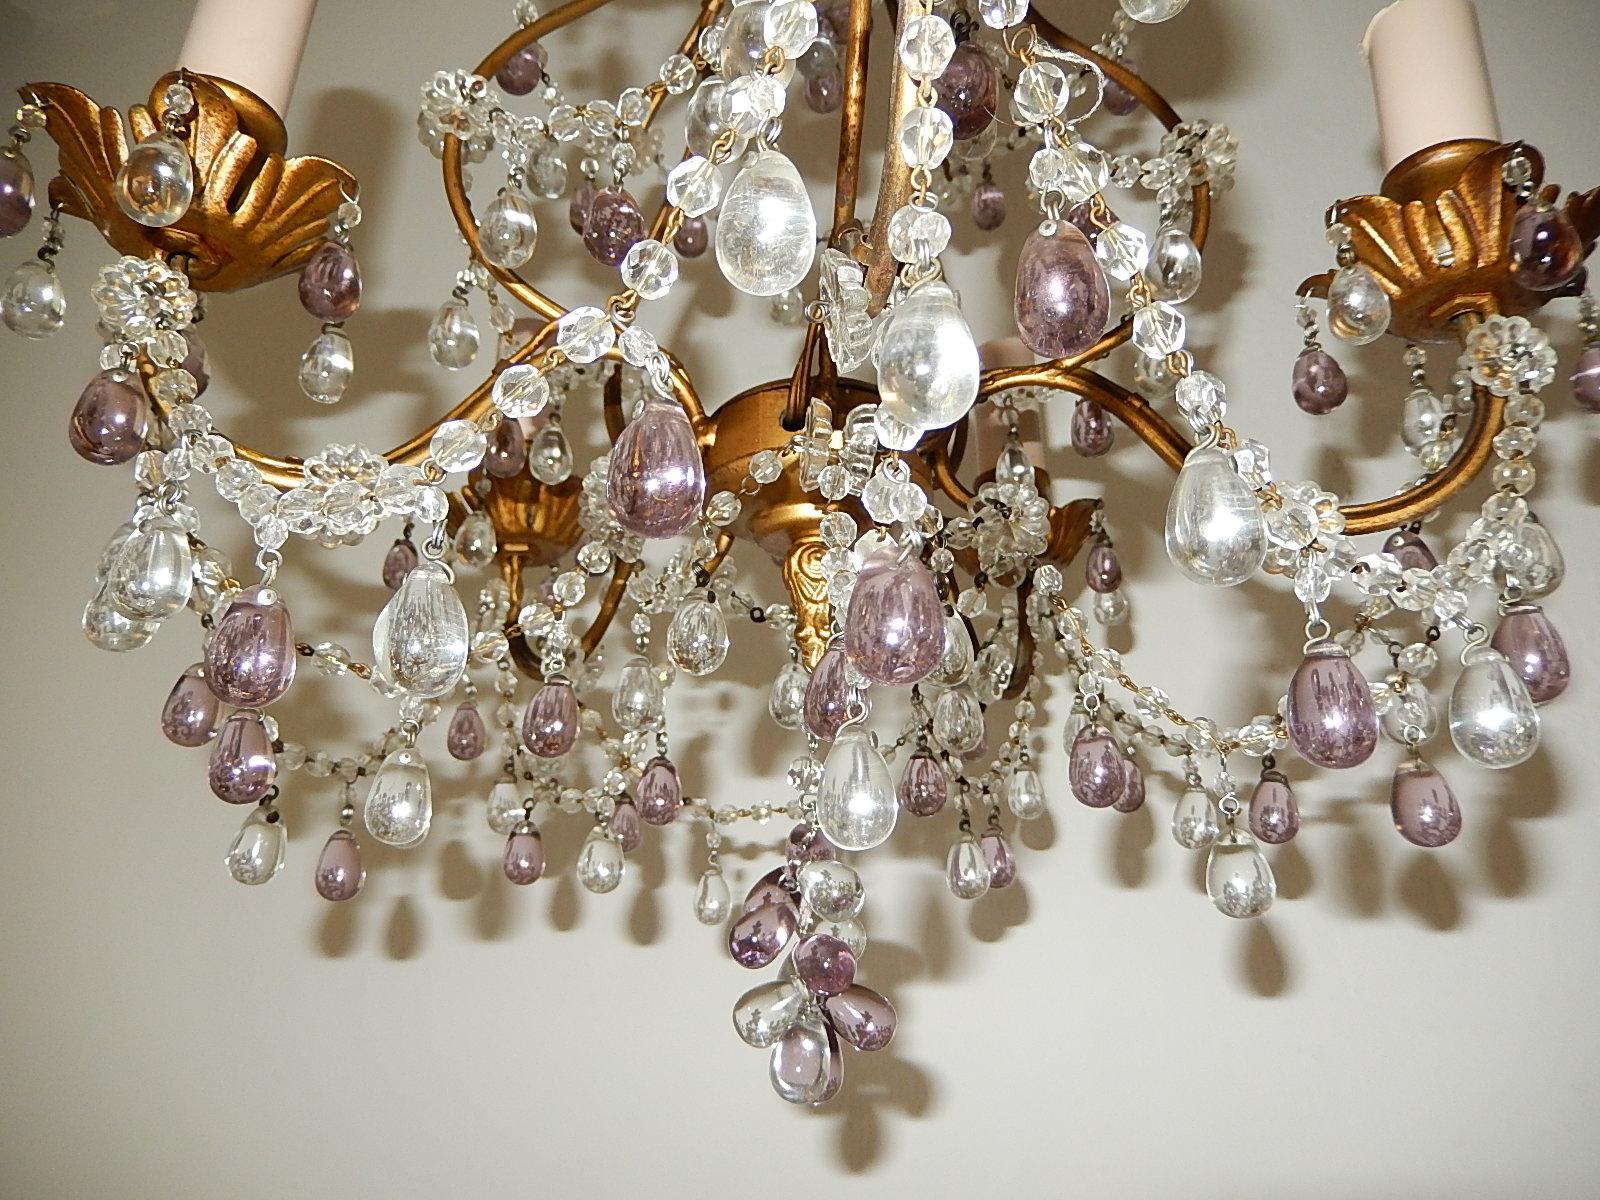 French Beaded Maison Baguès  Amethyst & Clear Murano Drops Chandelier, 1920s For Sale 5